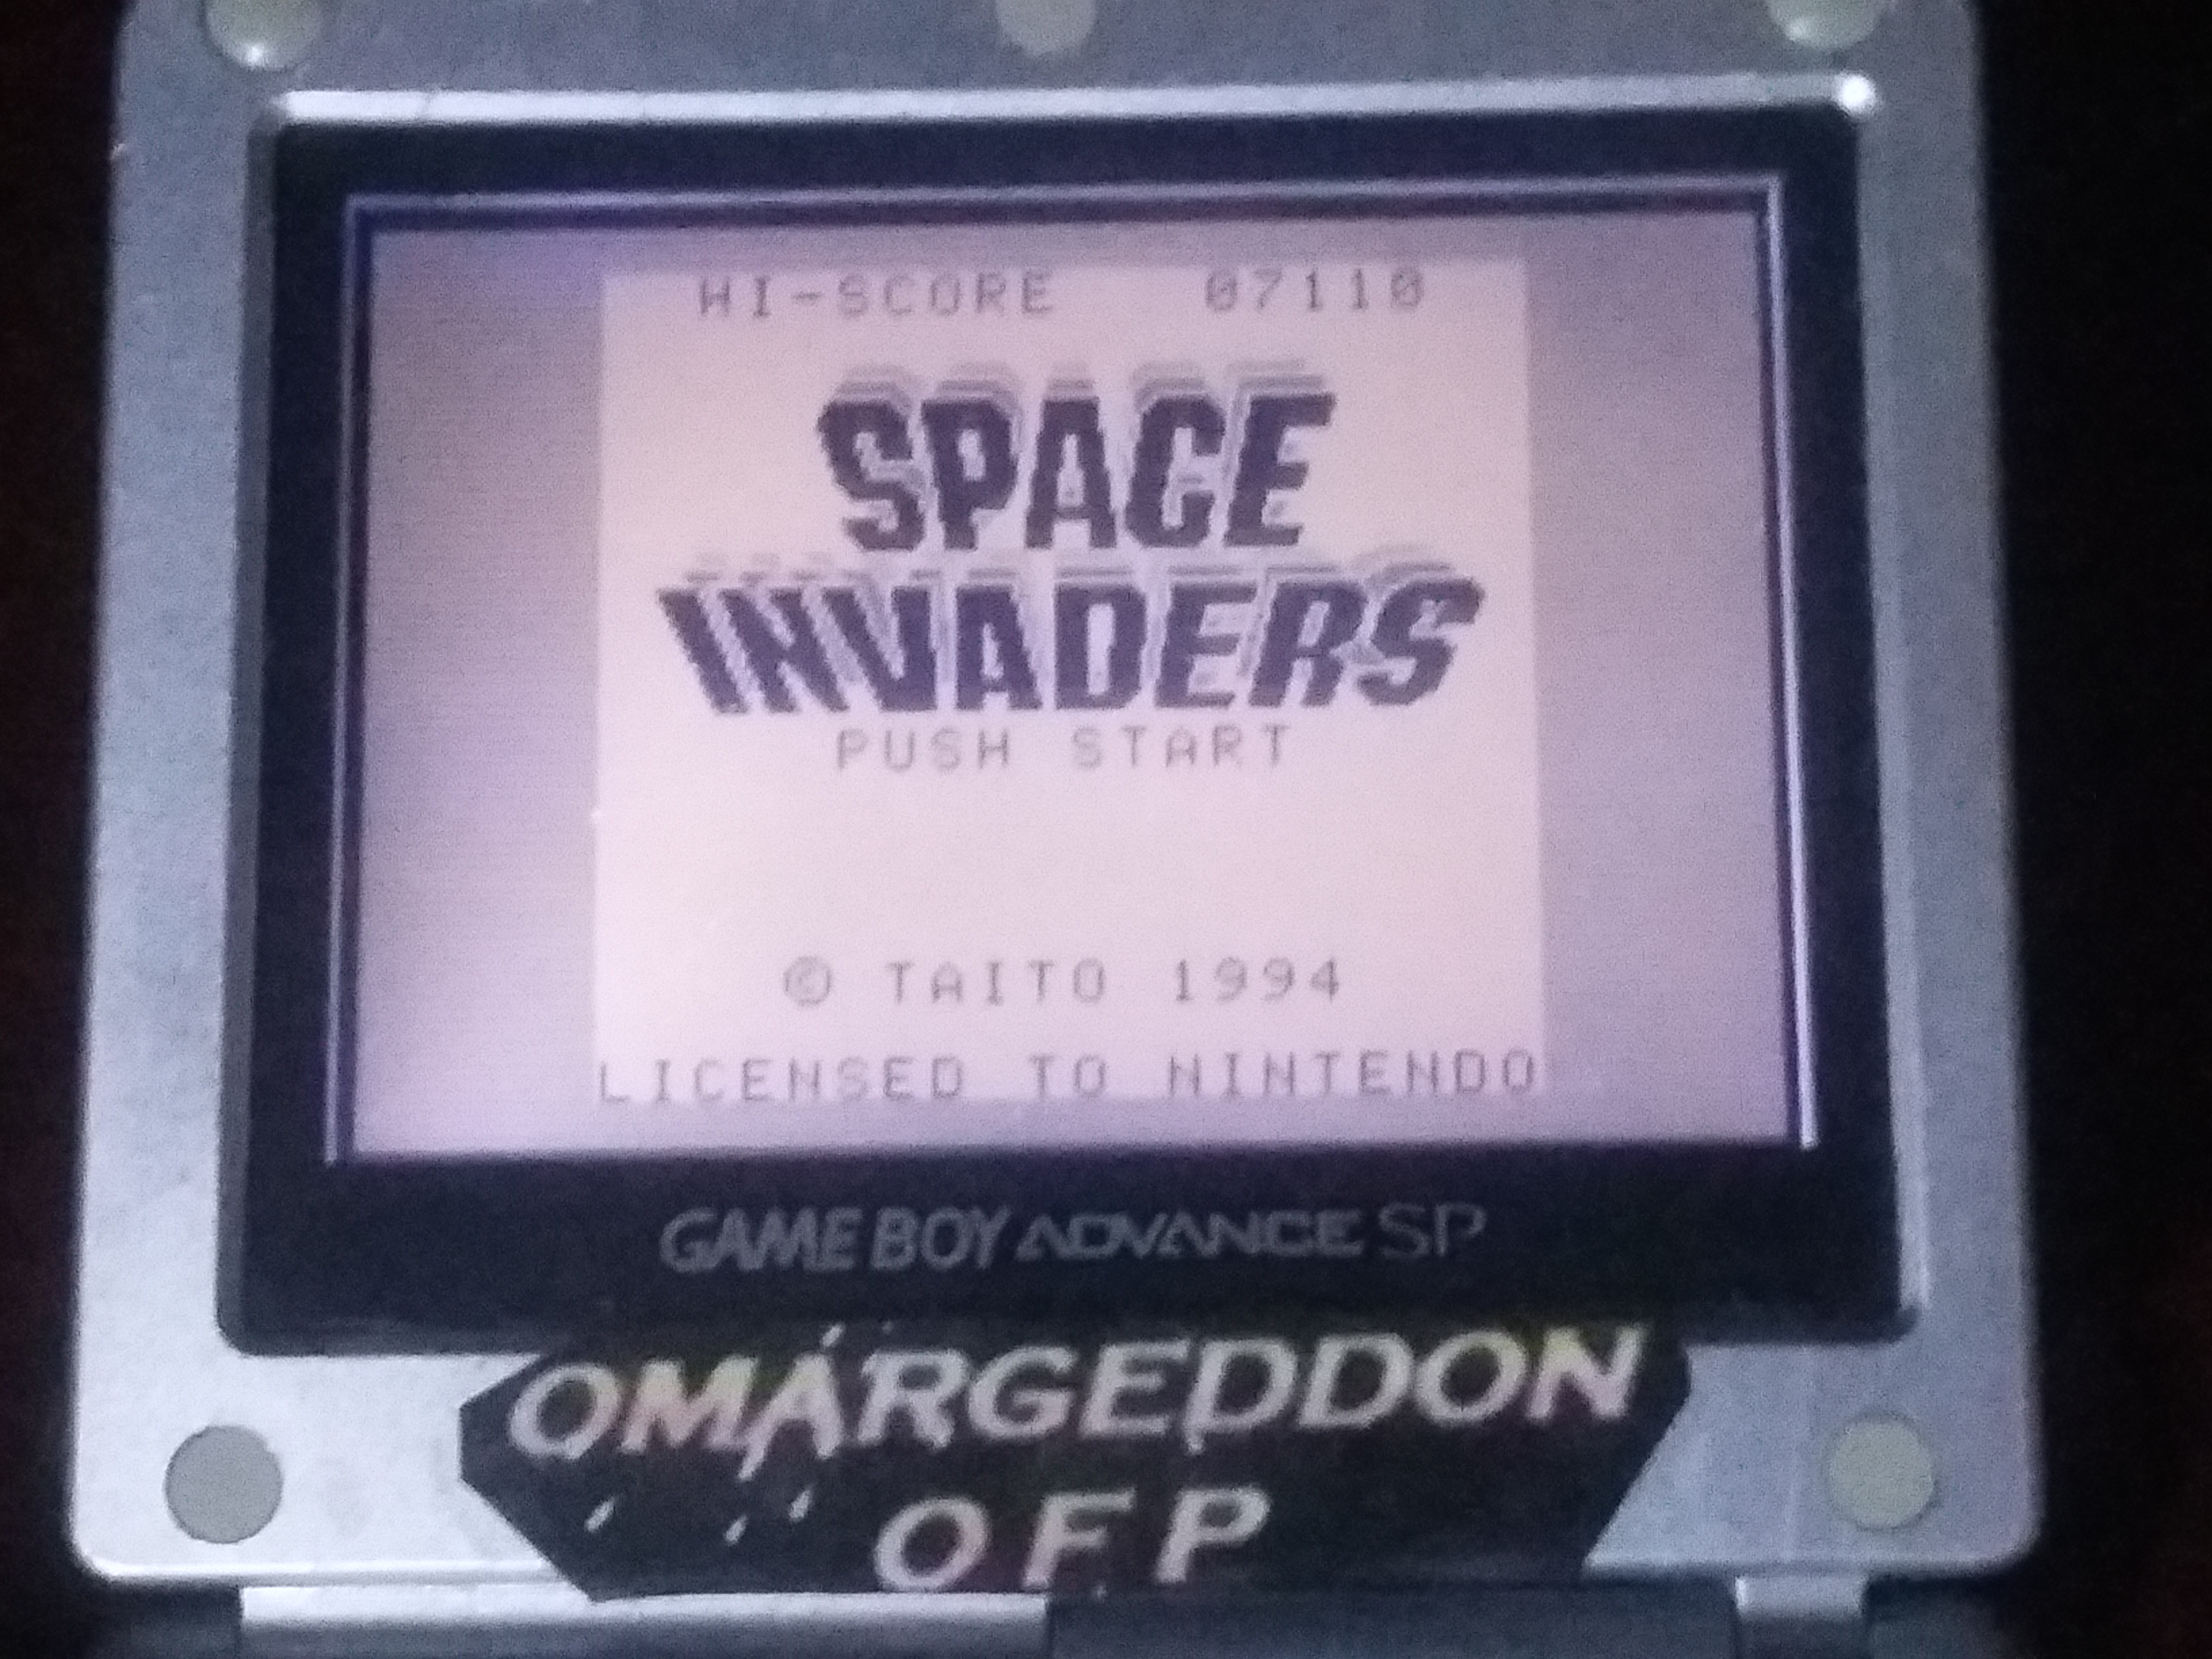 Space Invaders 7,110 points